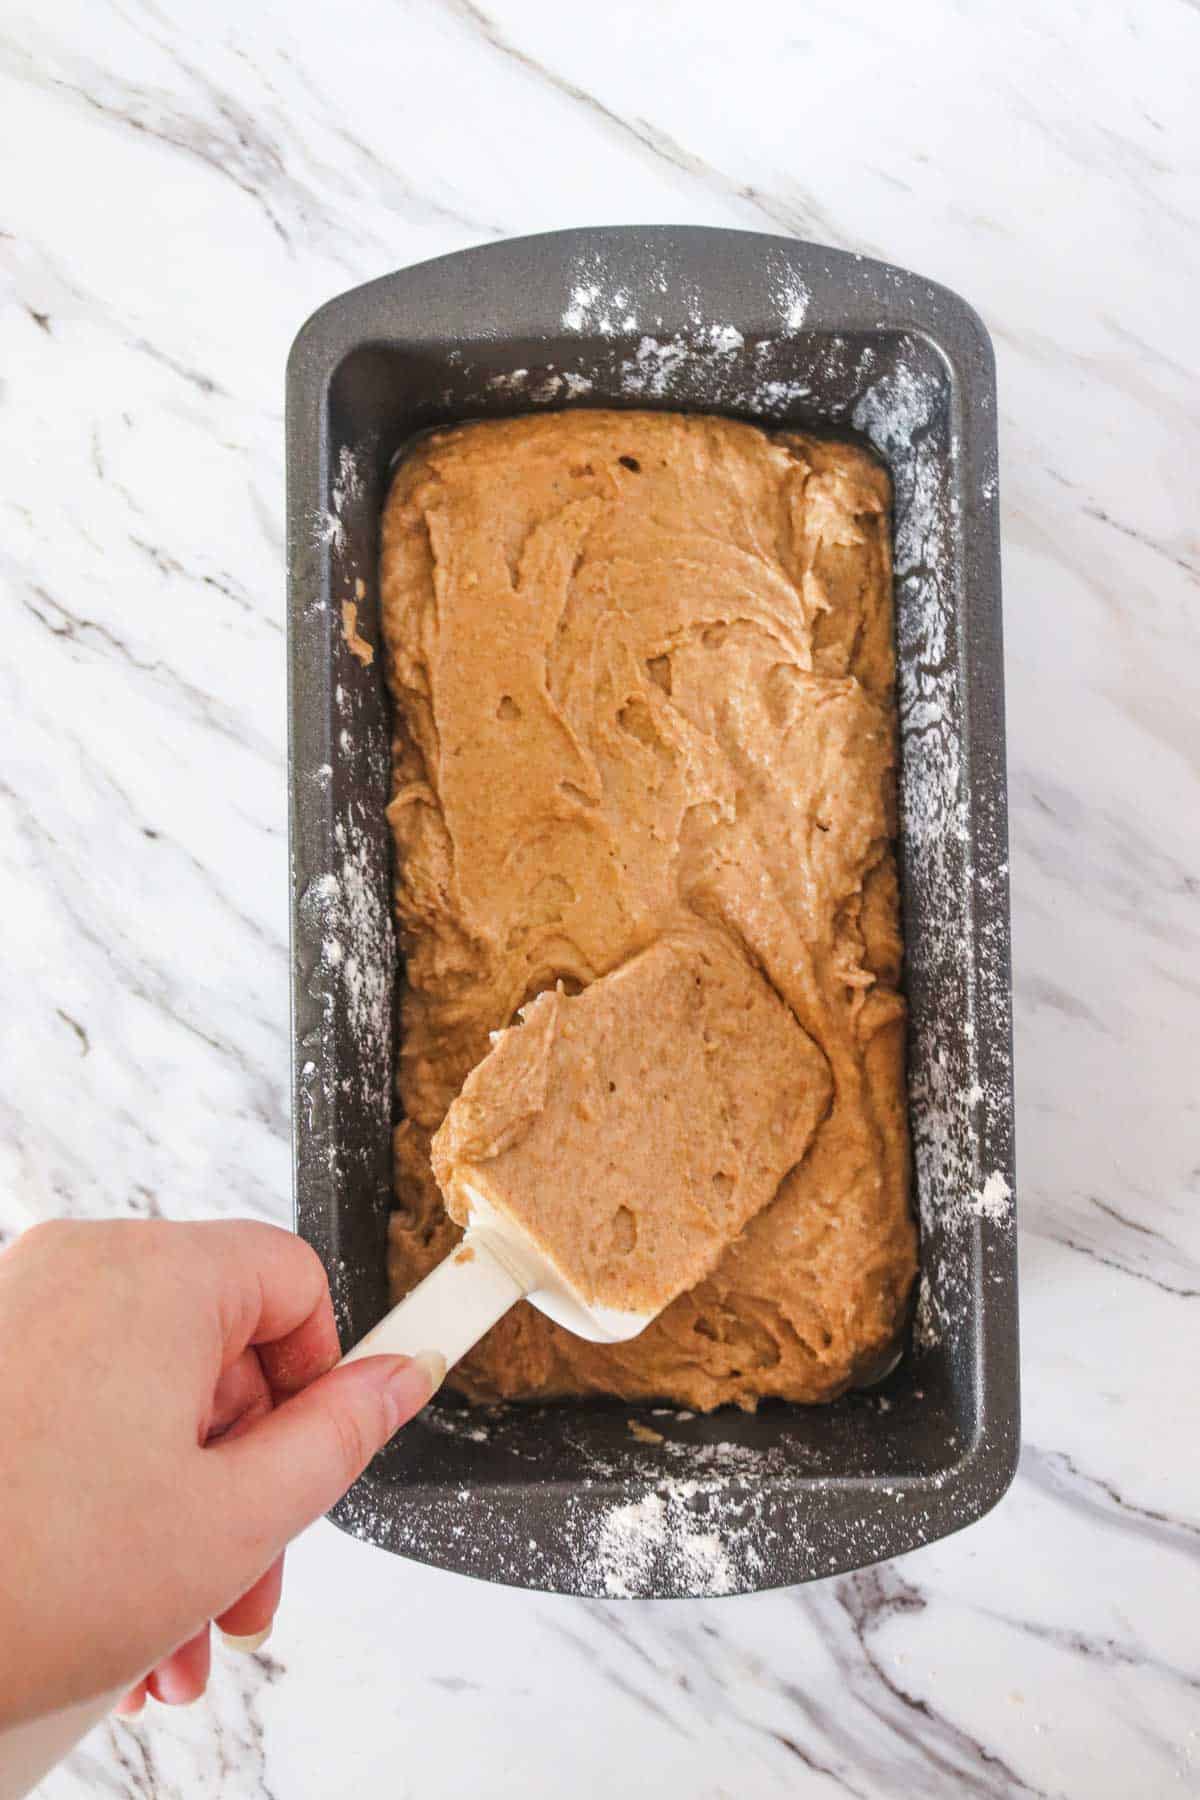 A person using a spatula to stir the gingerbread batter in a baking pan.